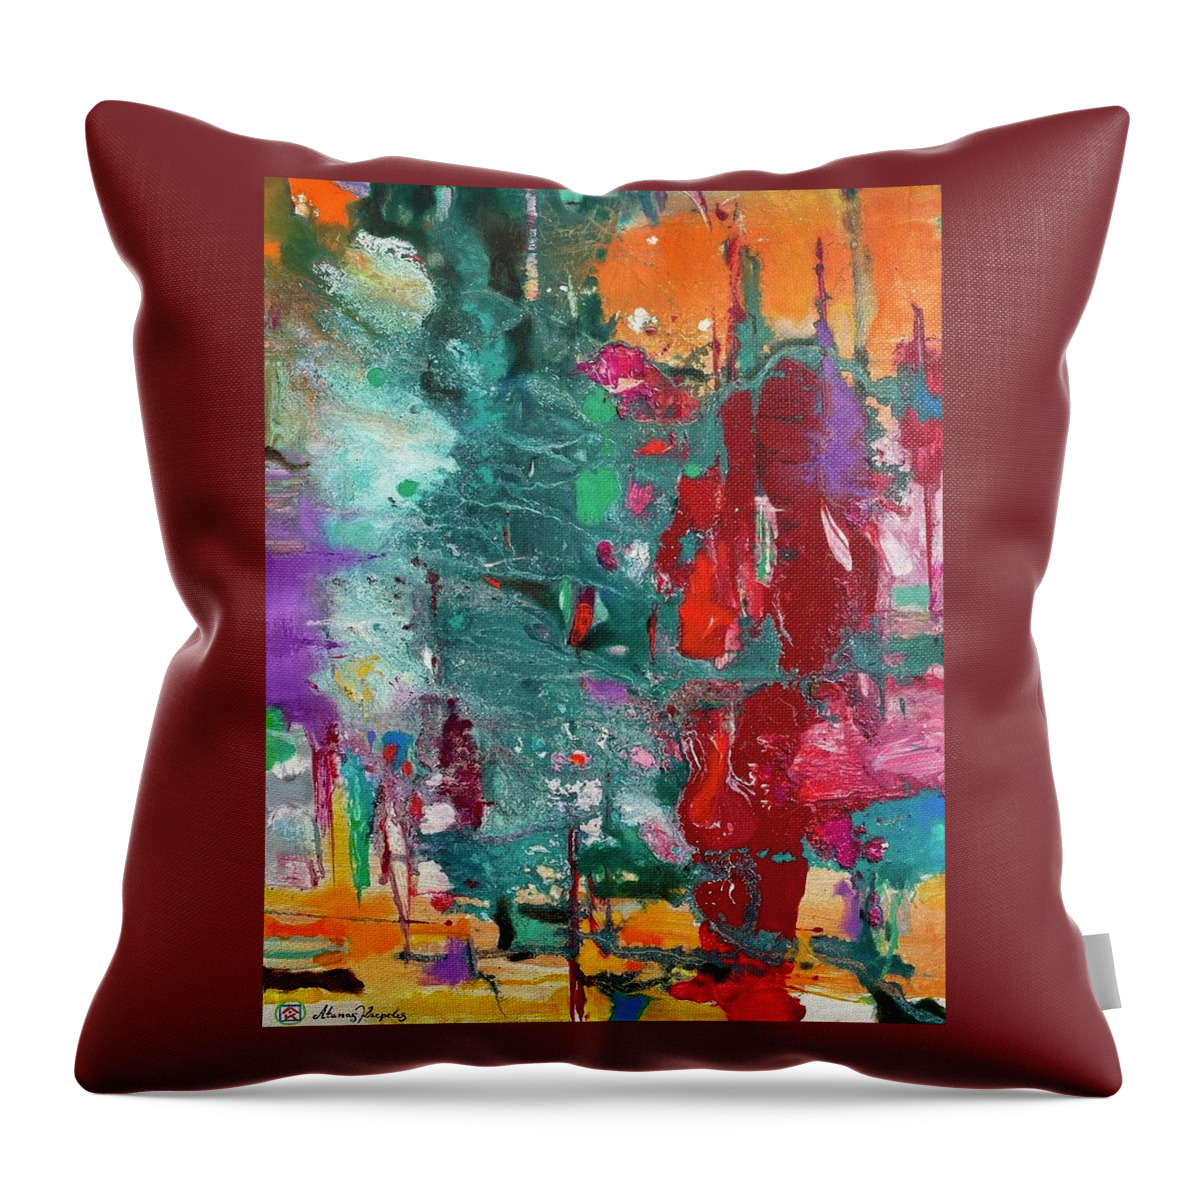 Abstract Throw Pillow featuring the painting Healing by Atanas Karpeles